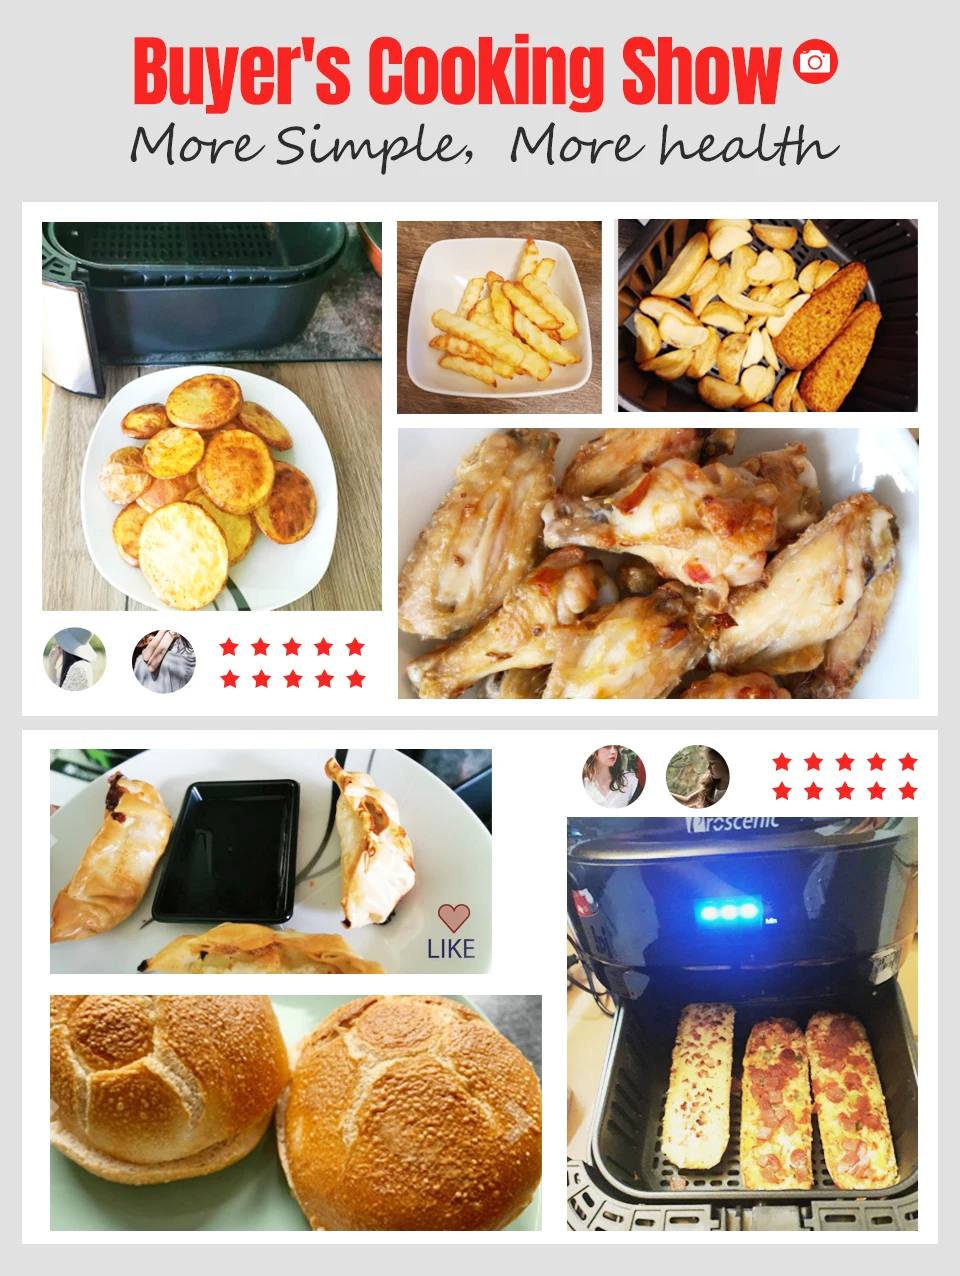 Proscenic T21 Air Fryer, 5.5L with Touch Screen Panel, APP and Voice Control, Nonstick Basket, Recipe Book, BPA and PFOA Free